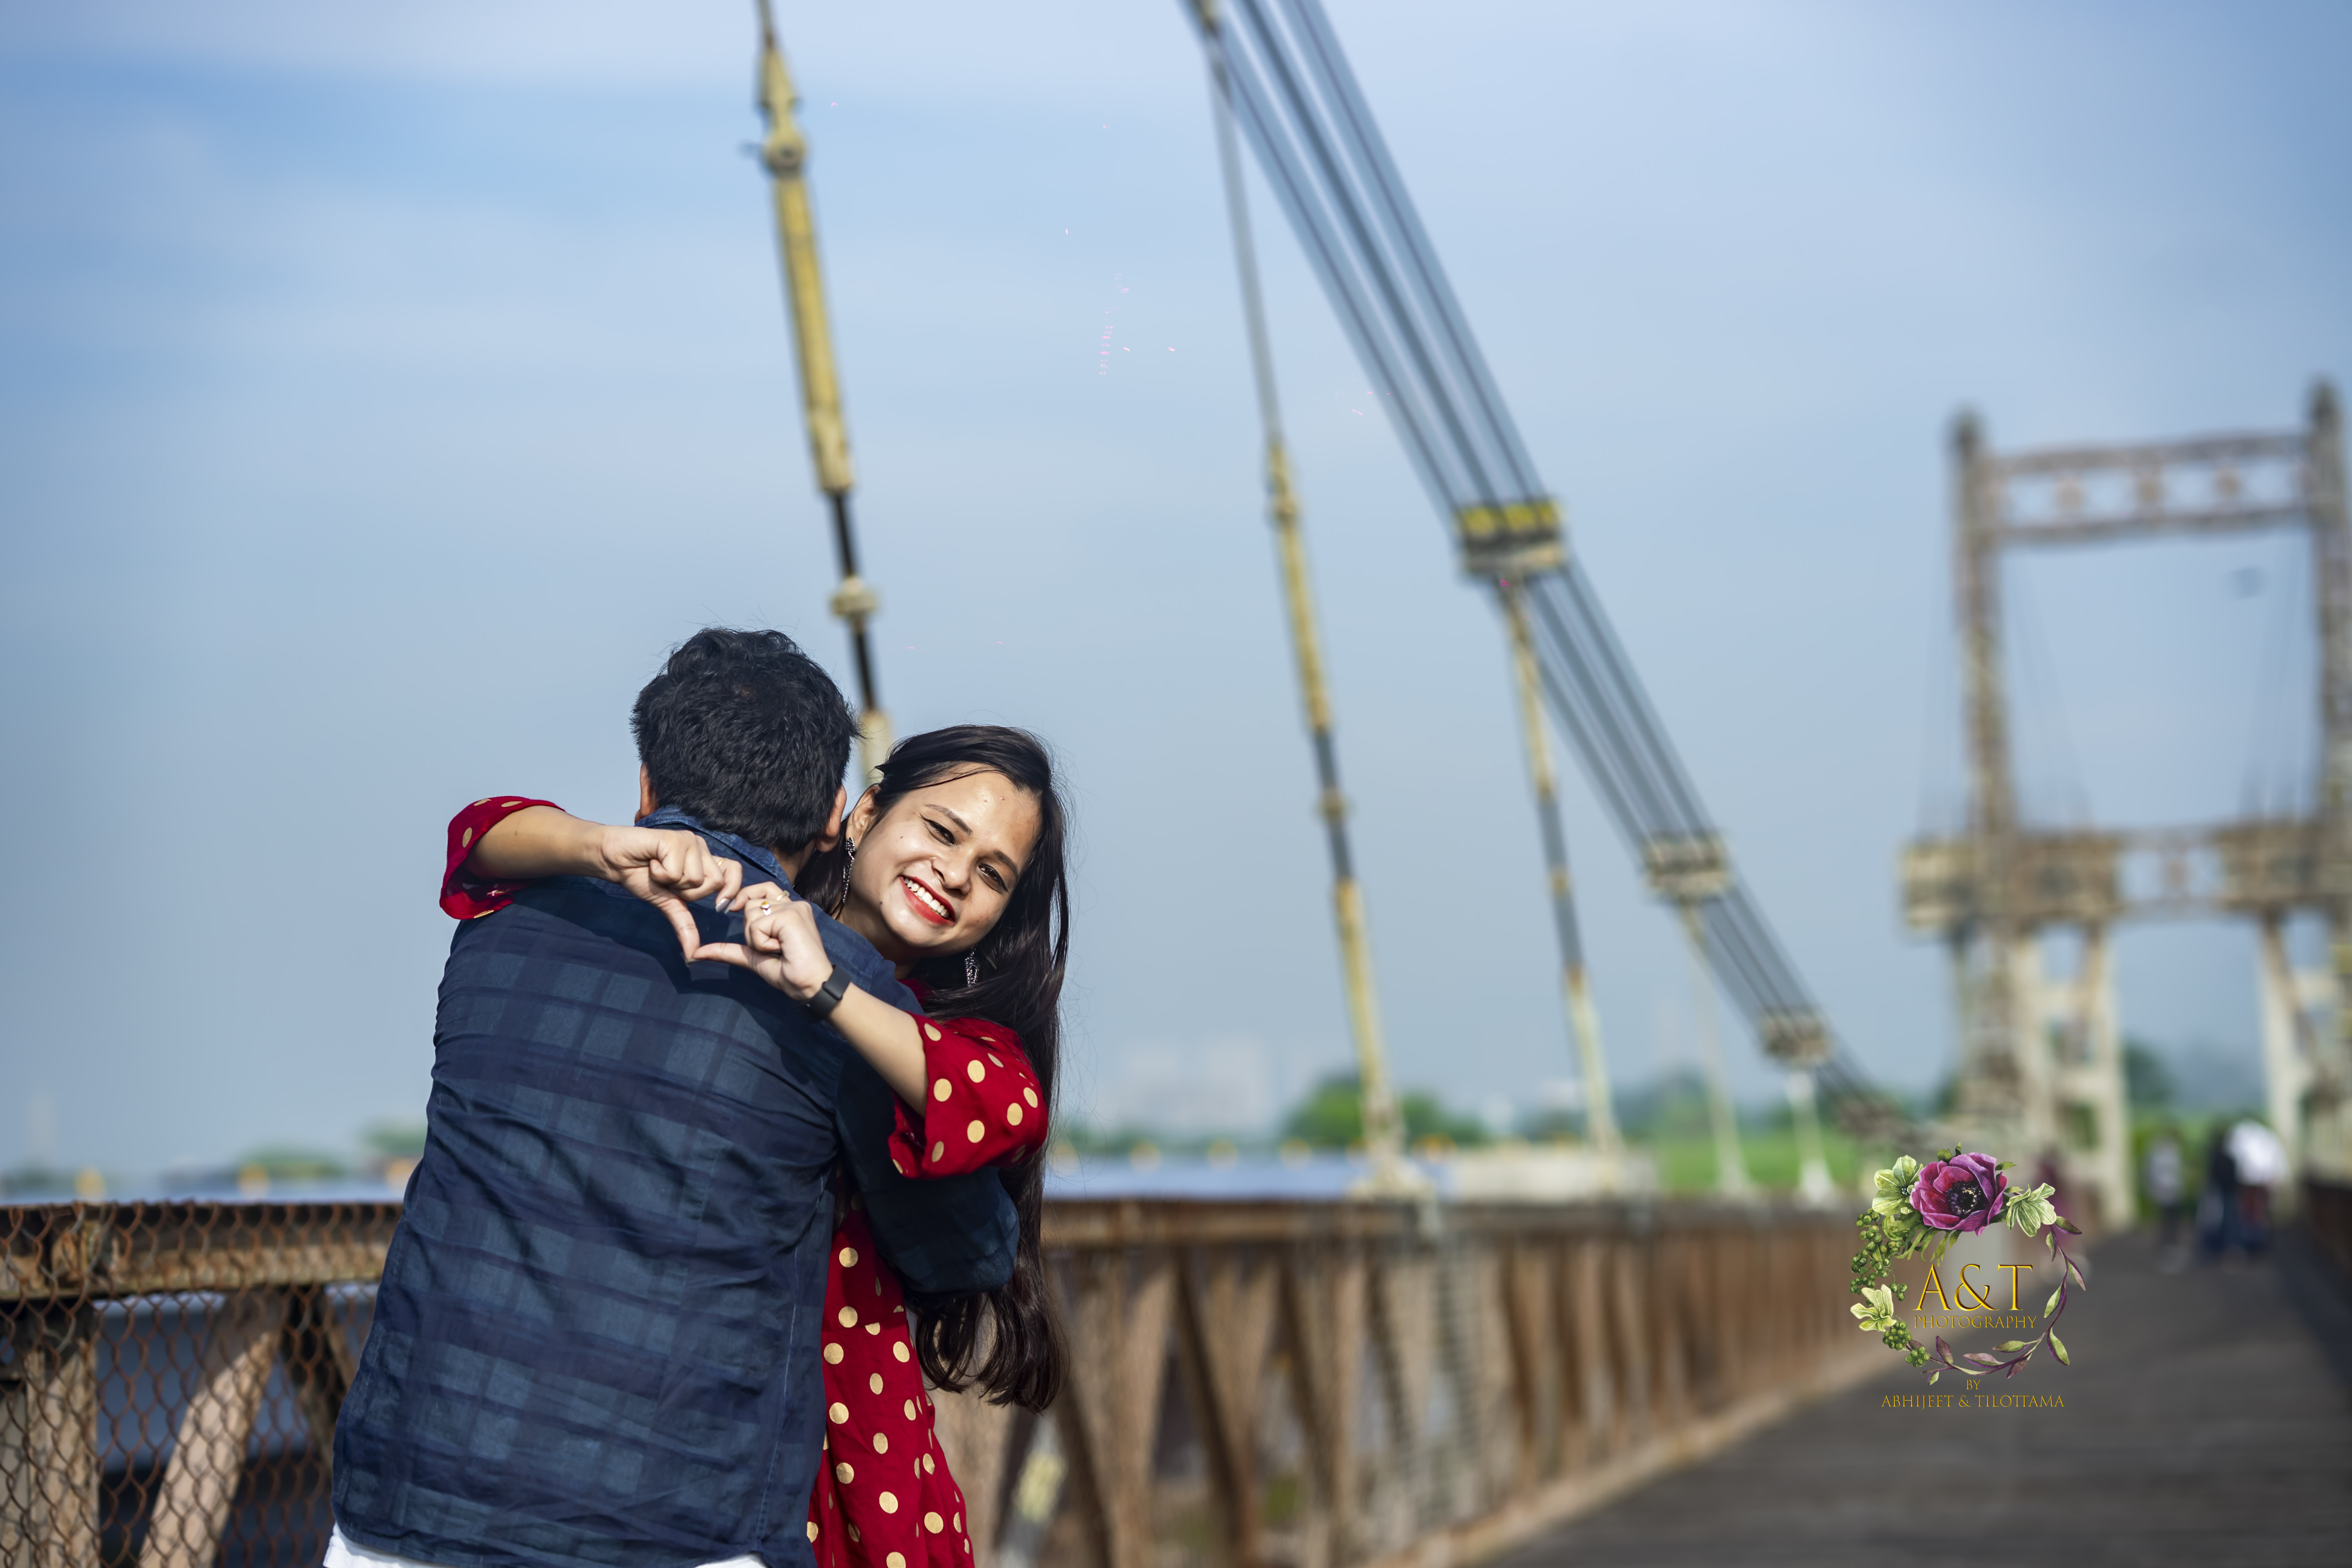 Their Love was enhancing the beauty of this amazing bridge at their Luminous Pre-Wedding Photography in Pune.